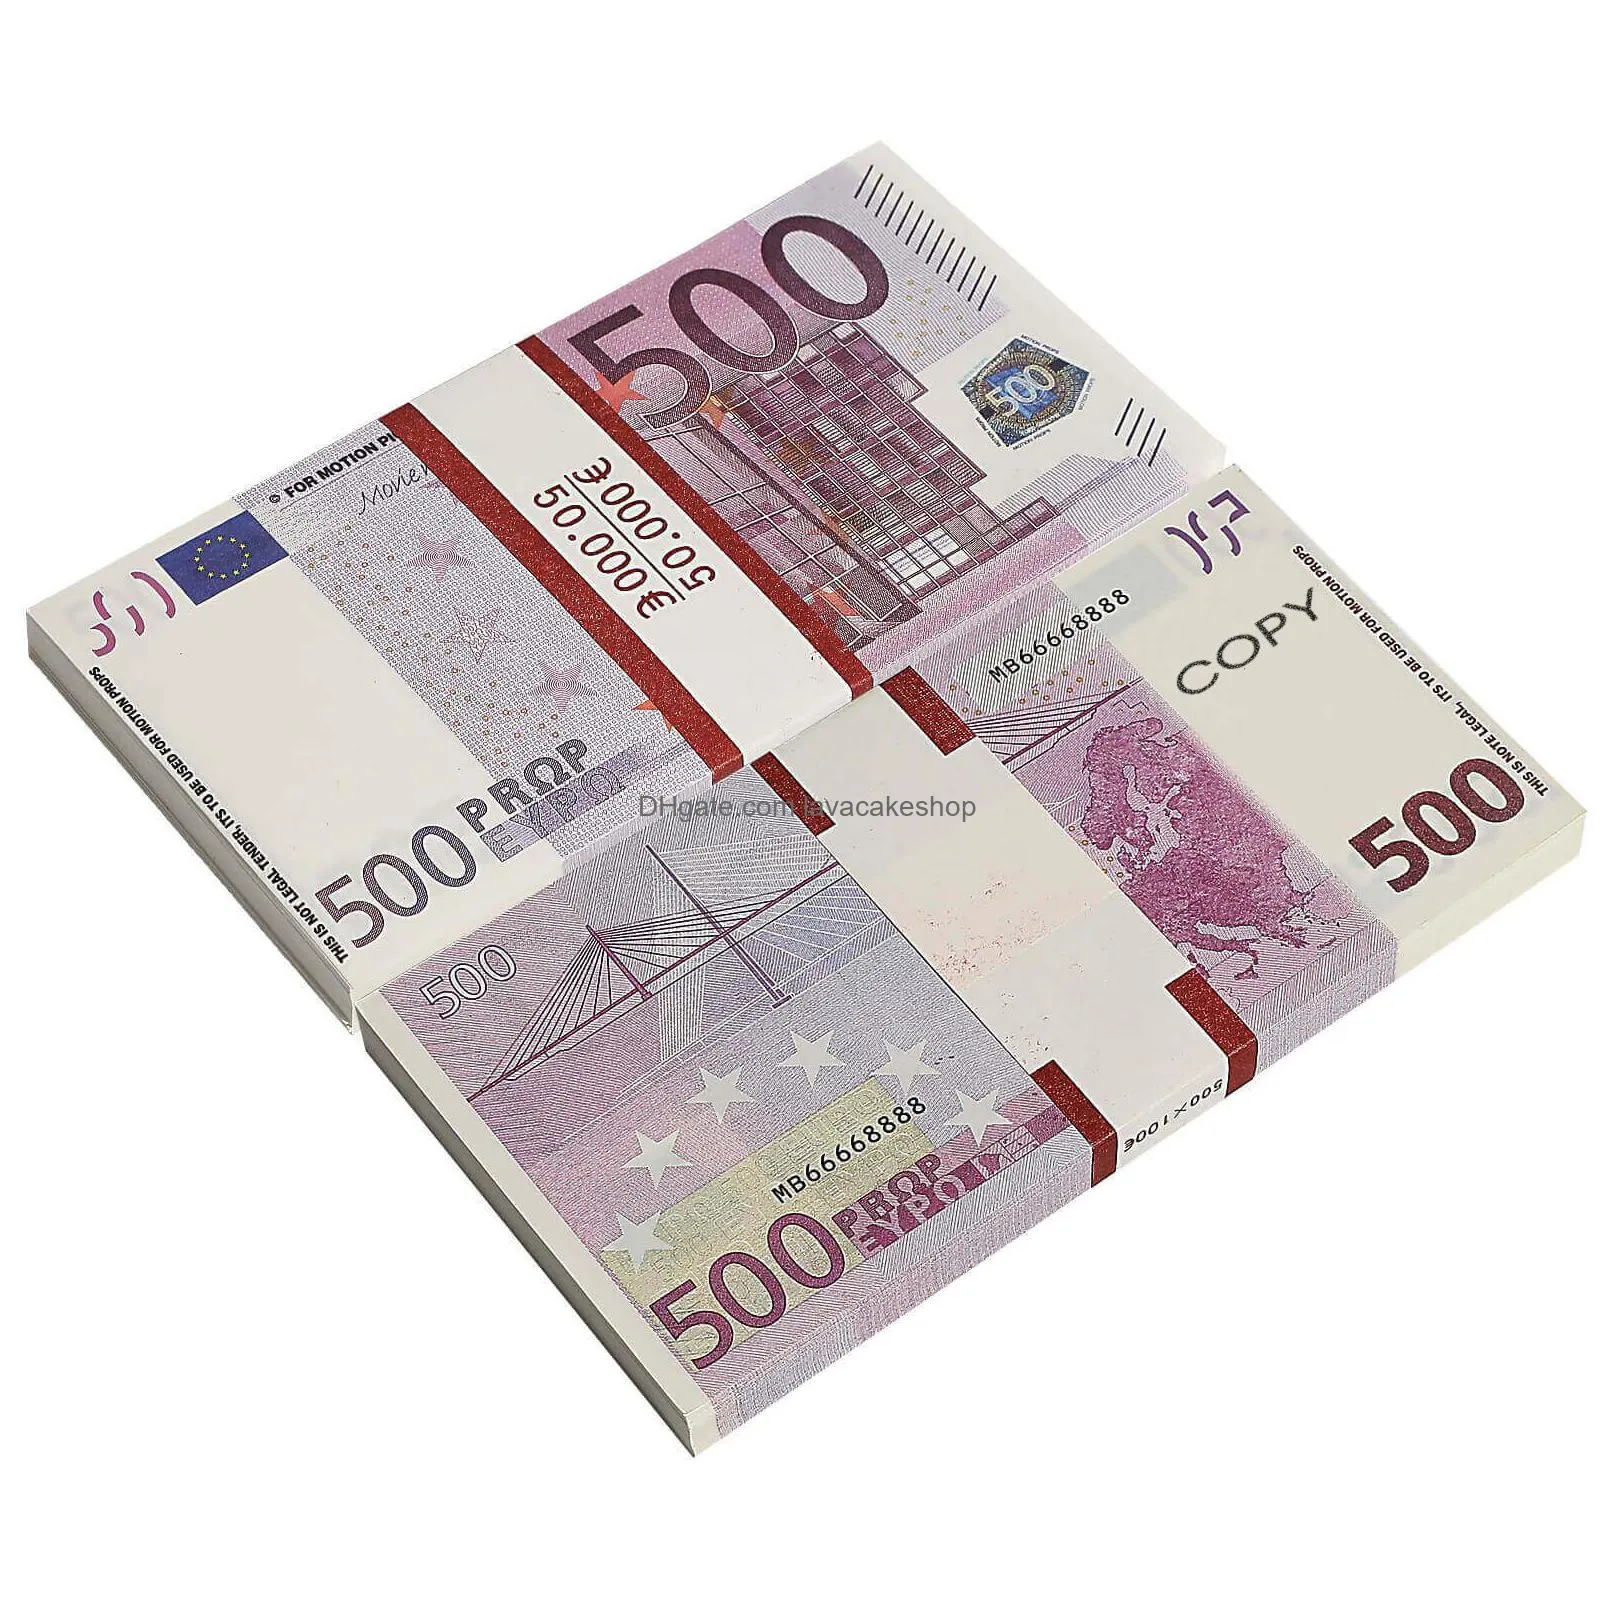 prop money 500 euro bill for sale online euros fake movie moneys 500 bills full print copy party realistic fake uk banknotes paper note pretend double